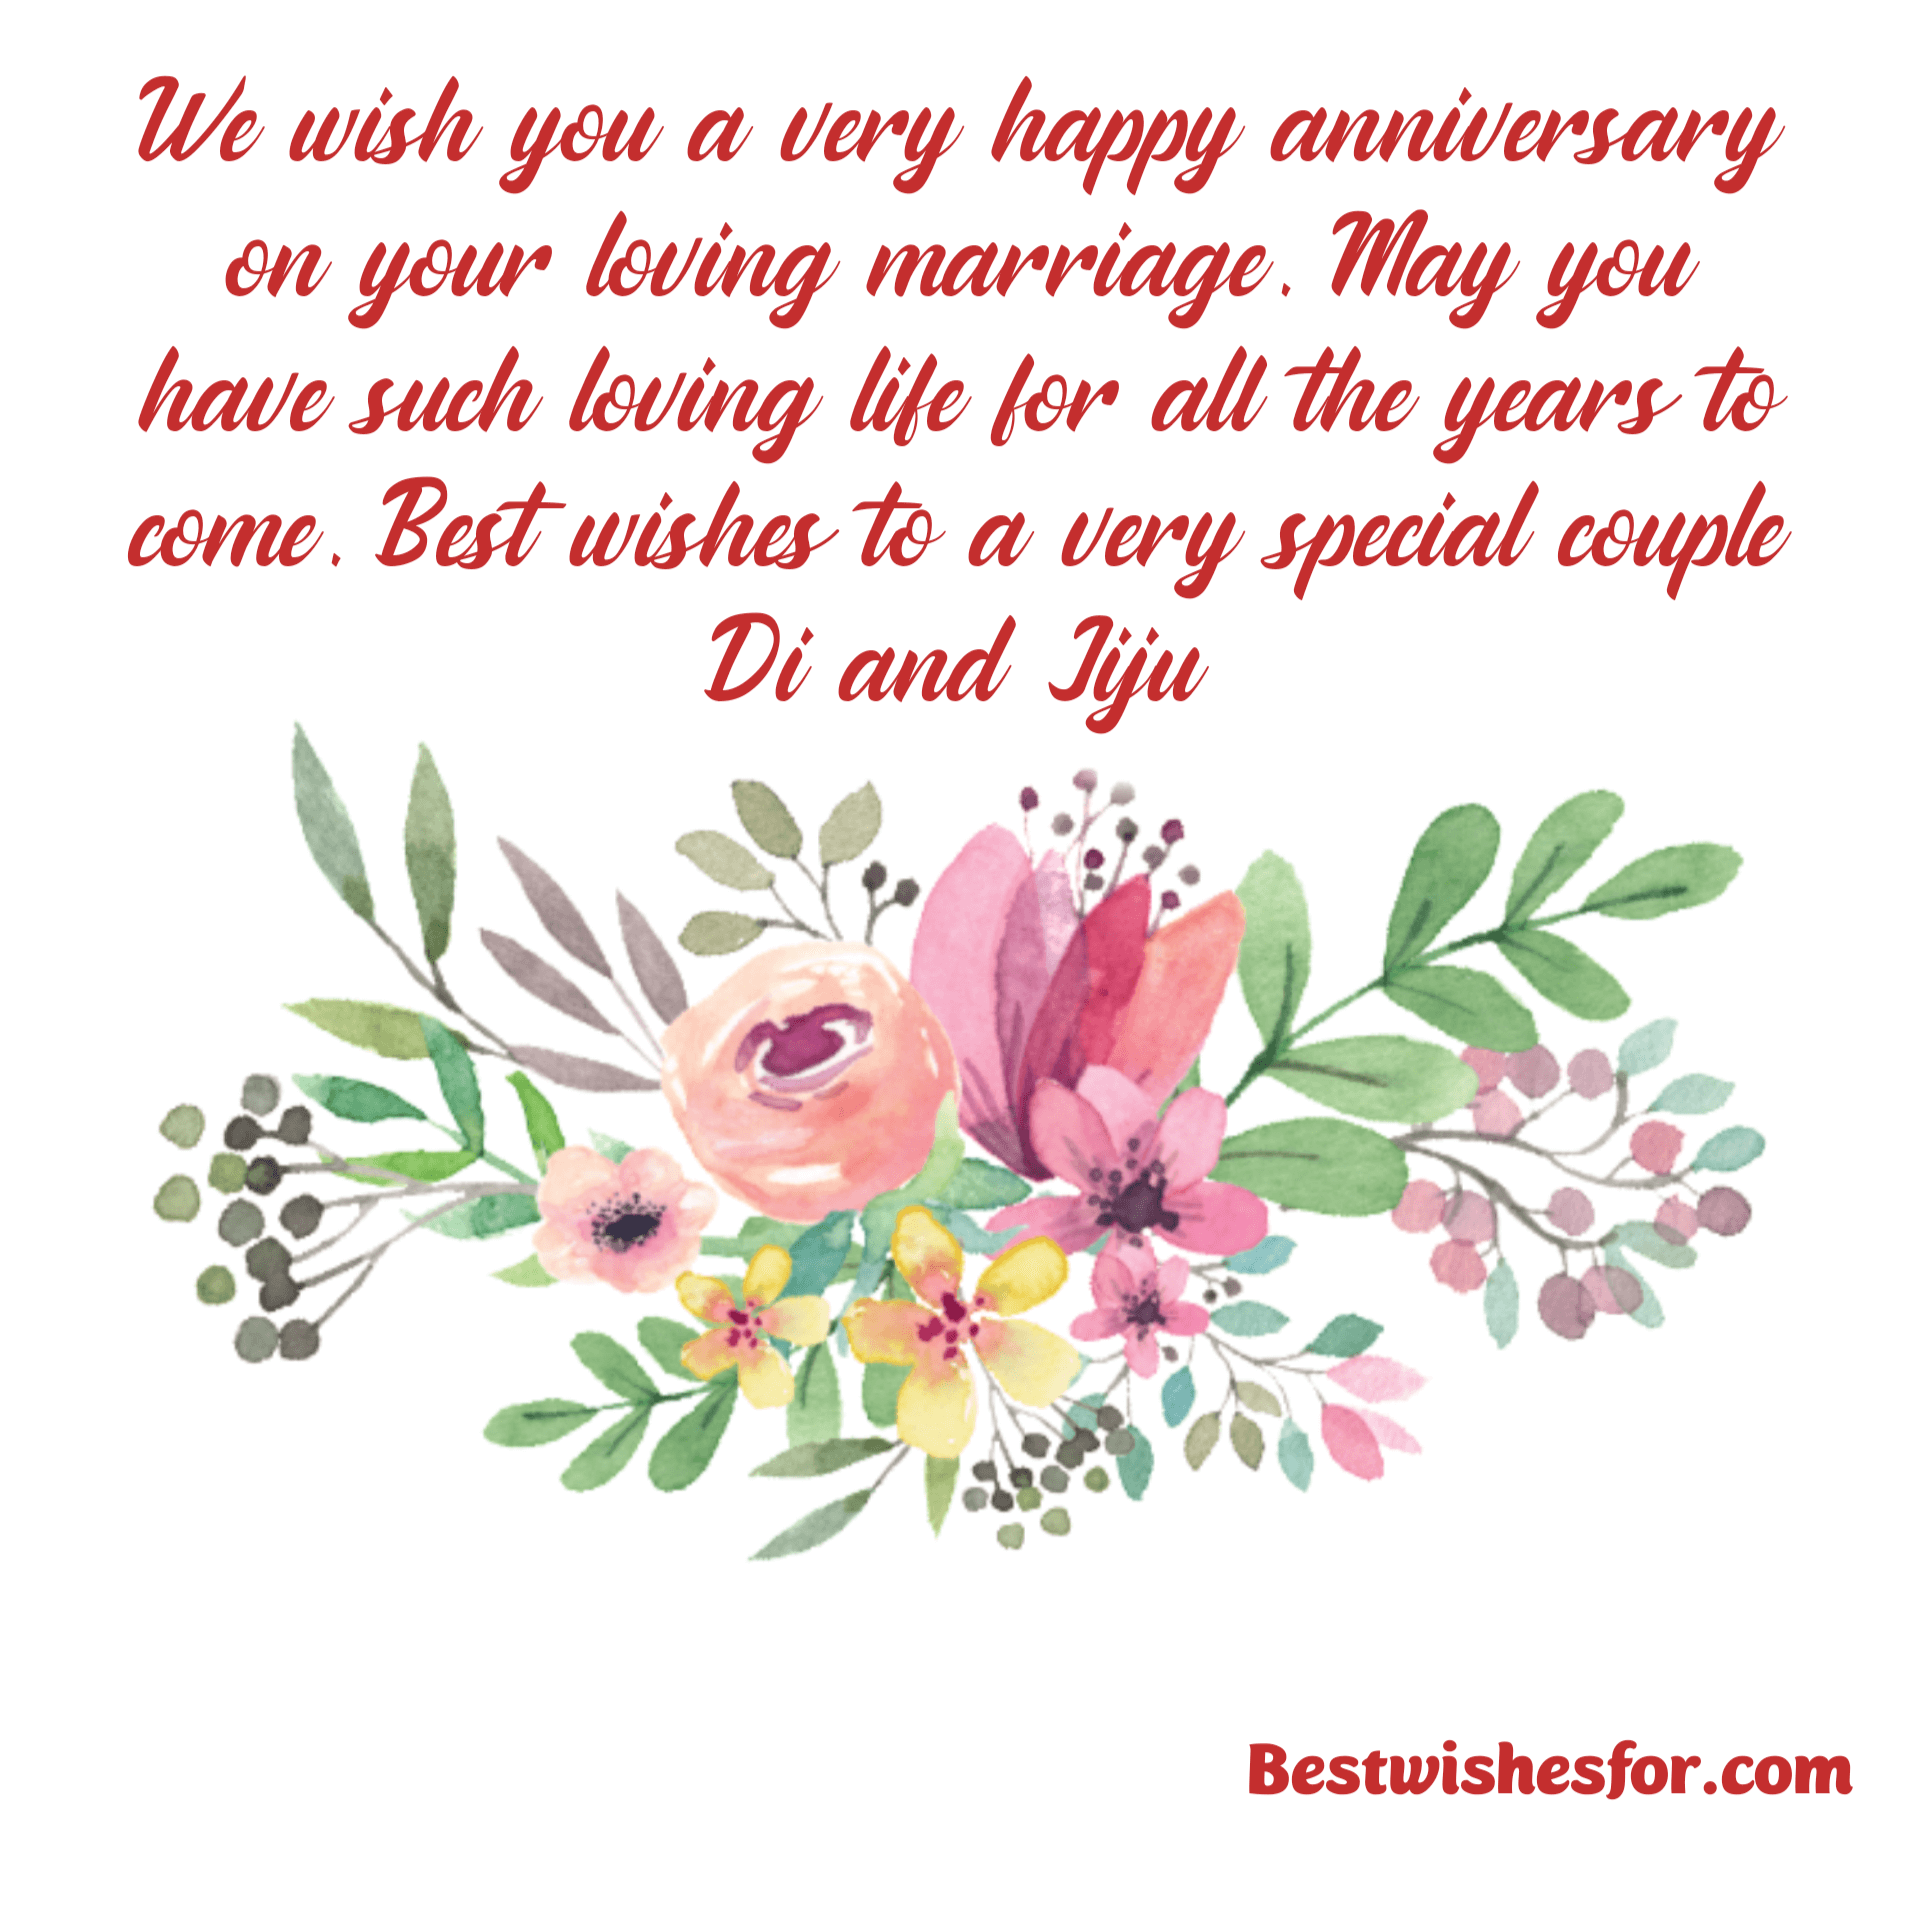 Wedding Anniversary Messages, Sayings Images For Didi & Jiju | Best Wishes